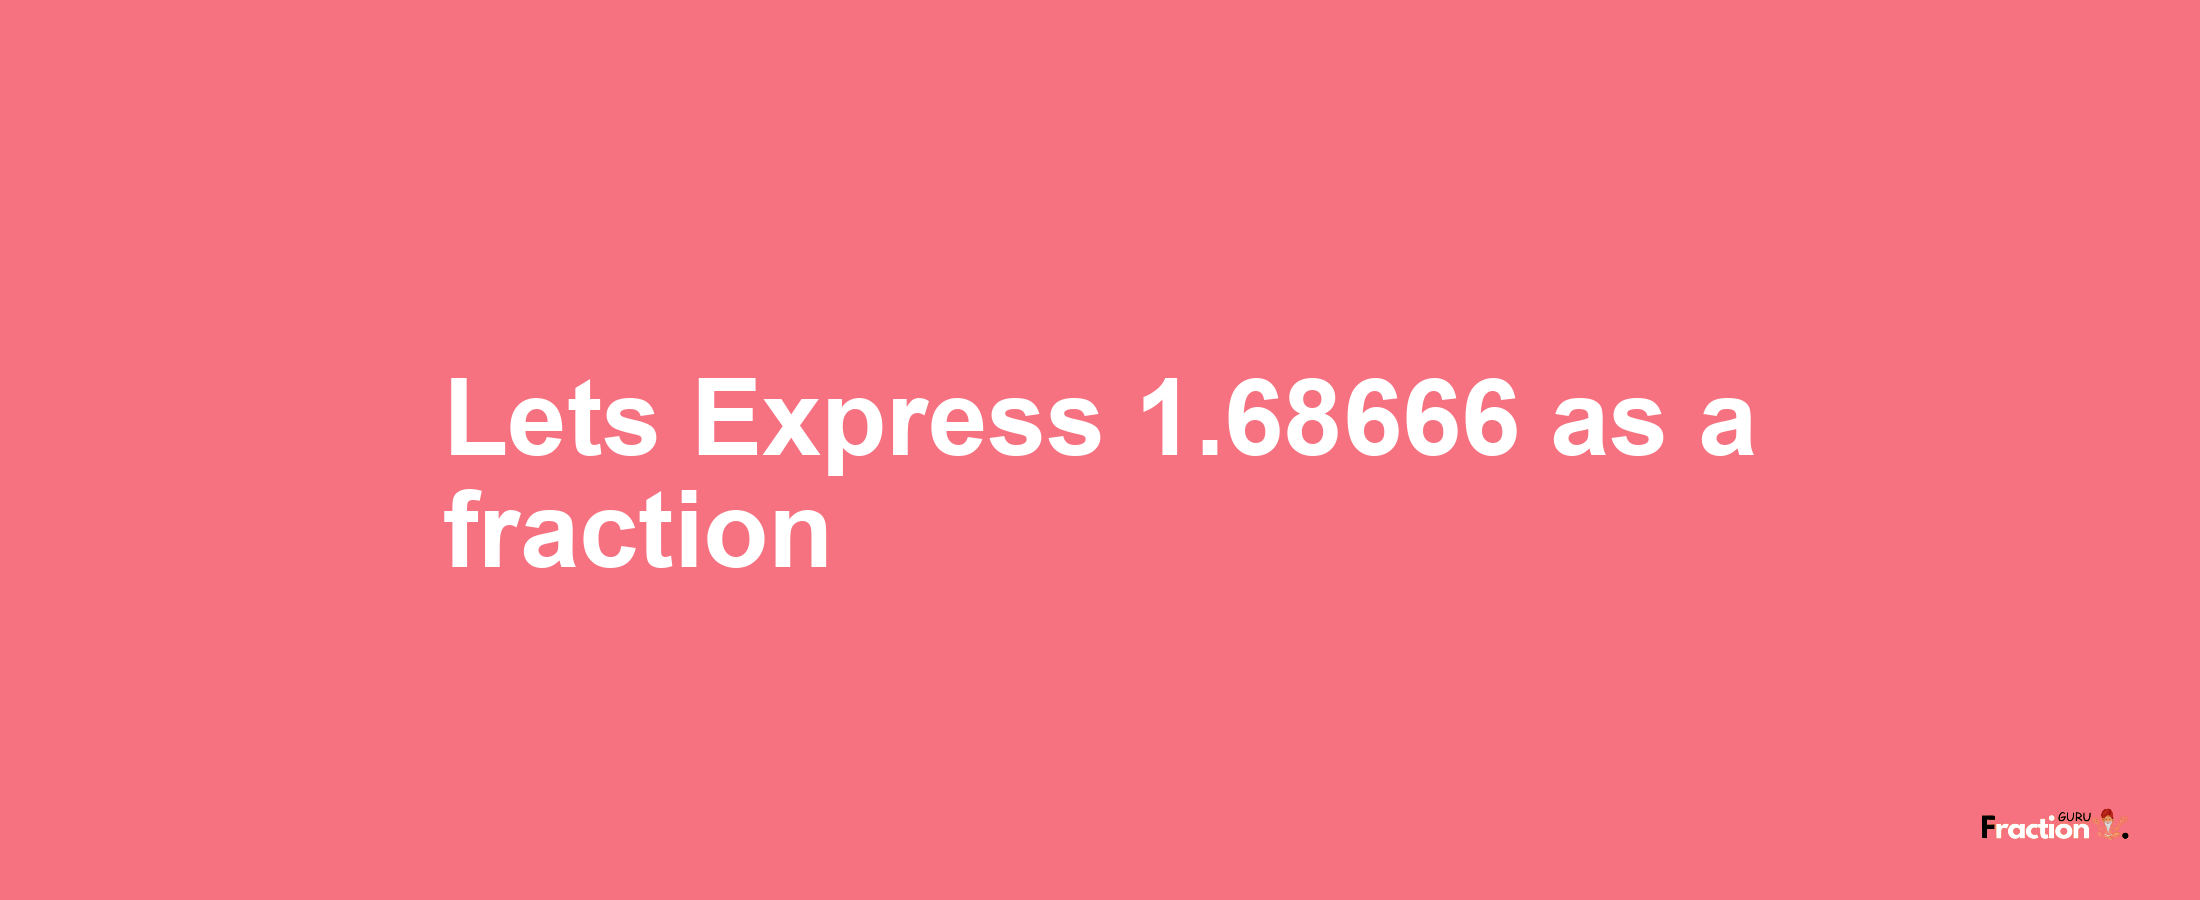 Lets Express 1.68666 as afraction